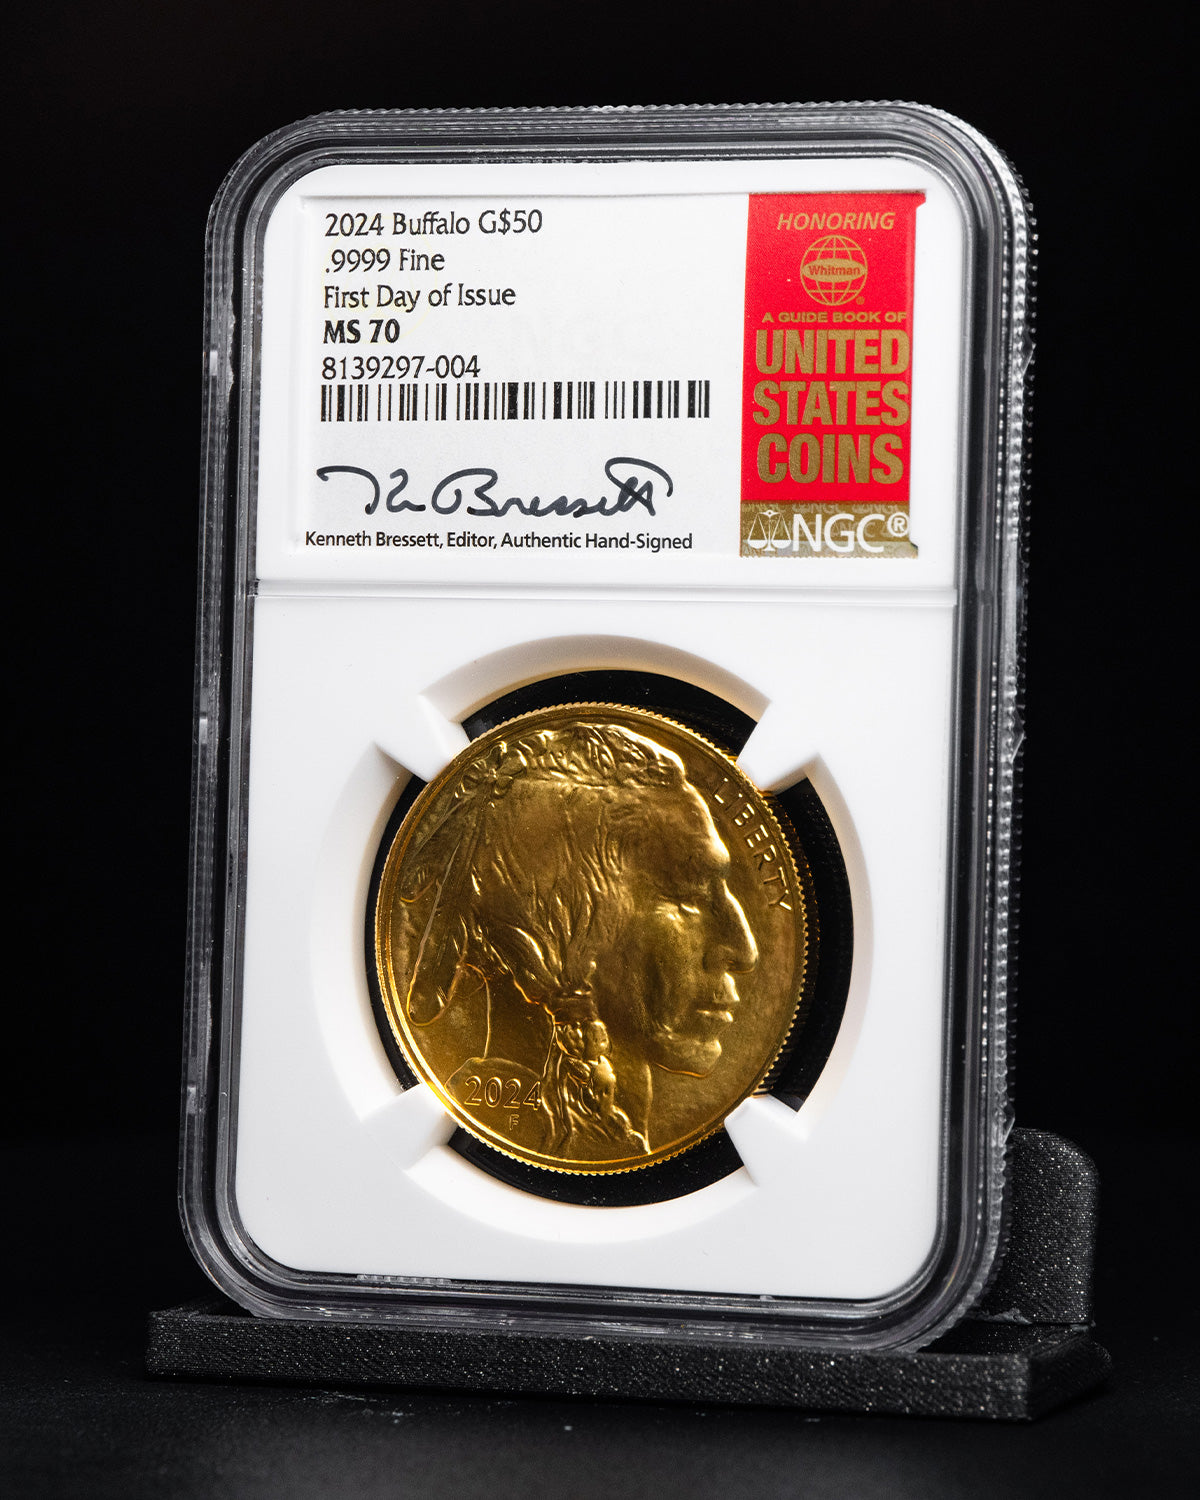 2024 $50 Gold Buffalo | First Day of Issue NGC MS70 | Kenneth Bressett Autographed